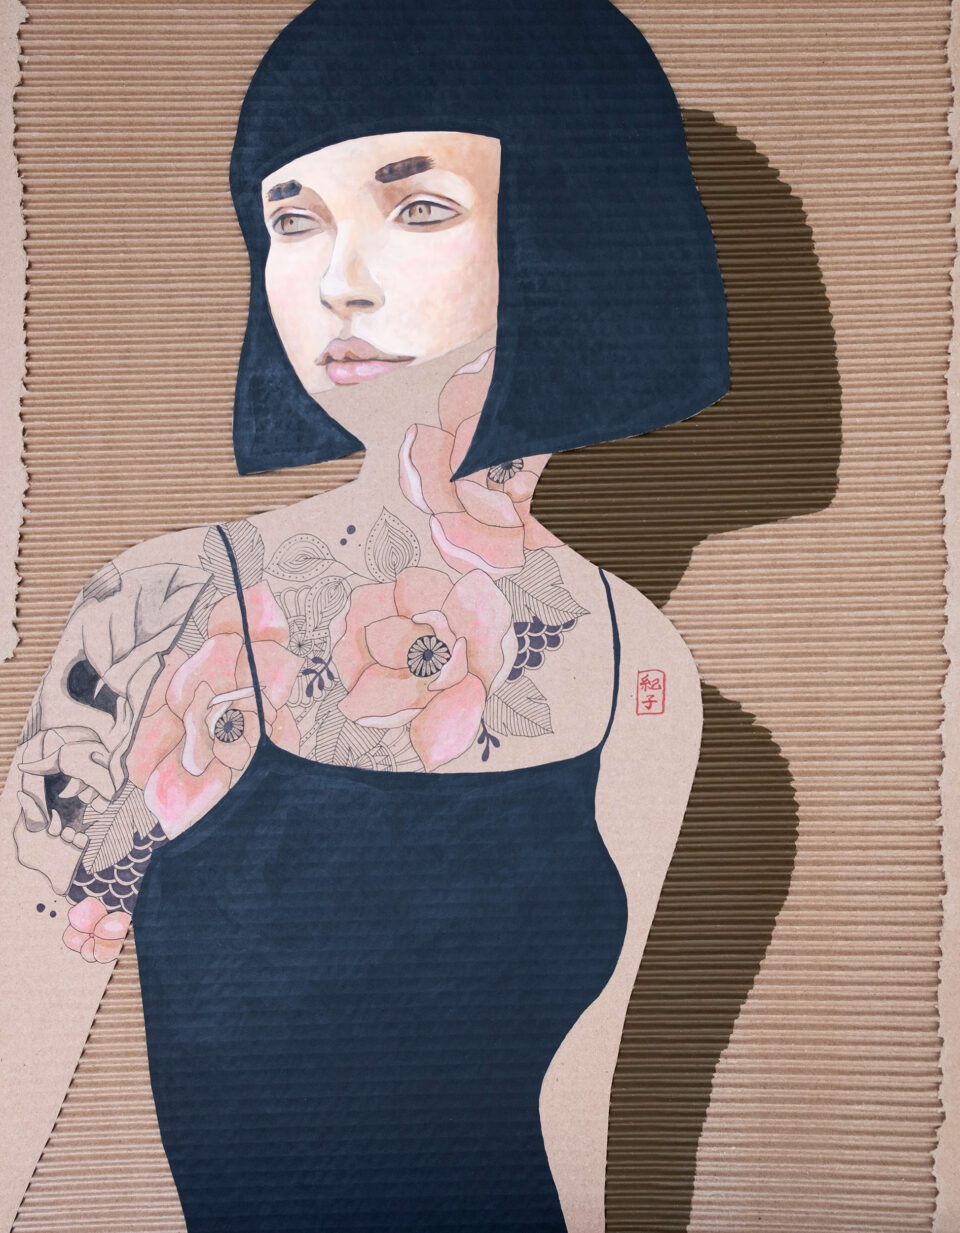 A female with black hair with a Japanese demon tattoo on her arm and chest. Japanese evil tattoo ( One ) symbolizes protection for an evil force—emerging artist Noriko Fukui’s unique portrait with acrylic on Cardboard.